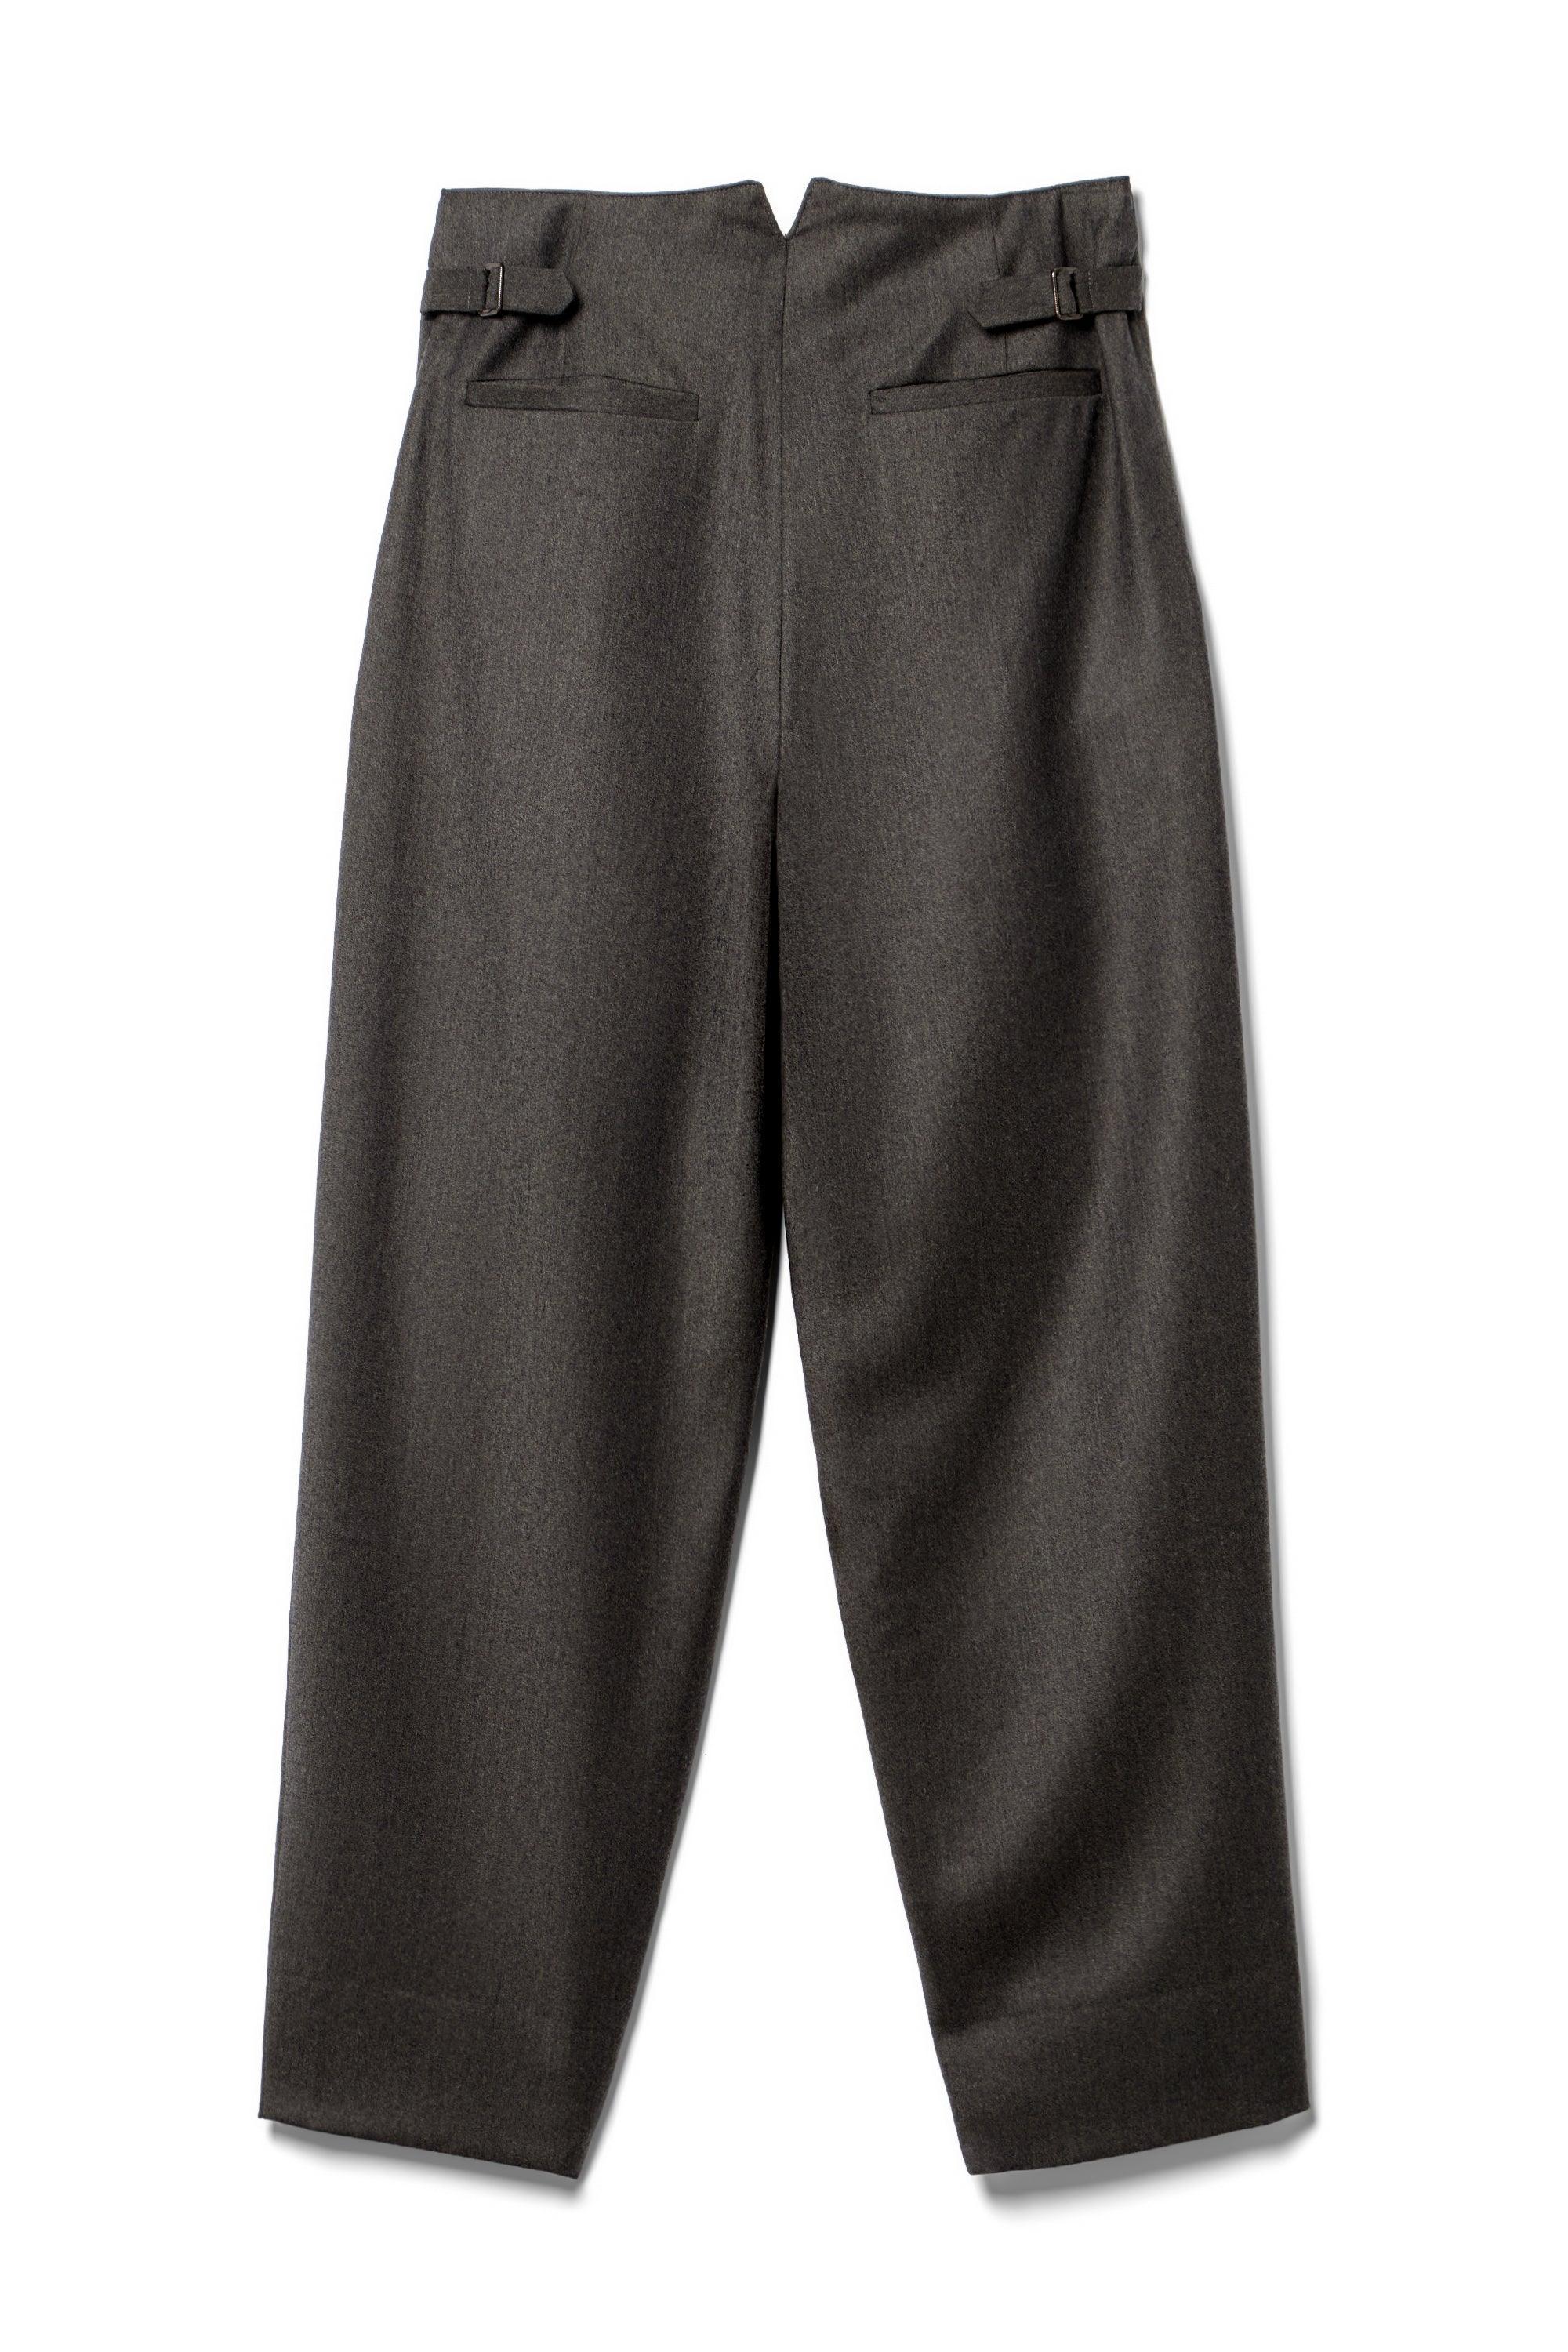 THE Trouser in tropical rws wool – 4